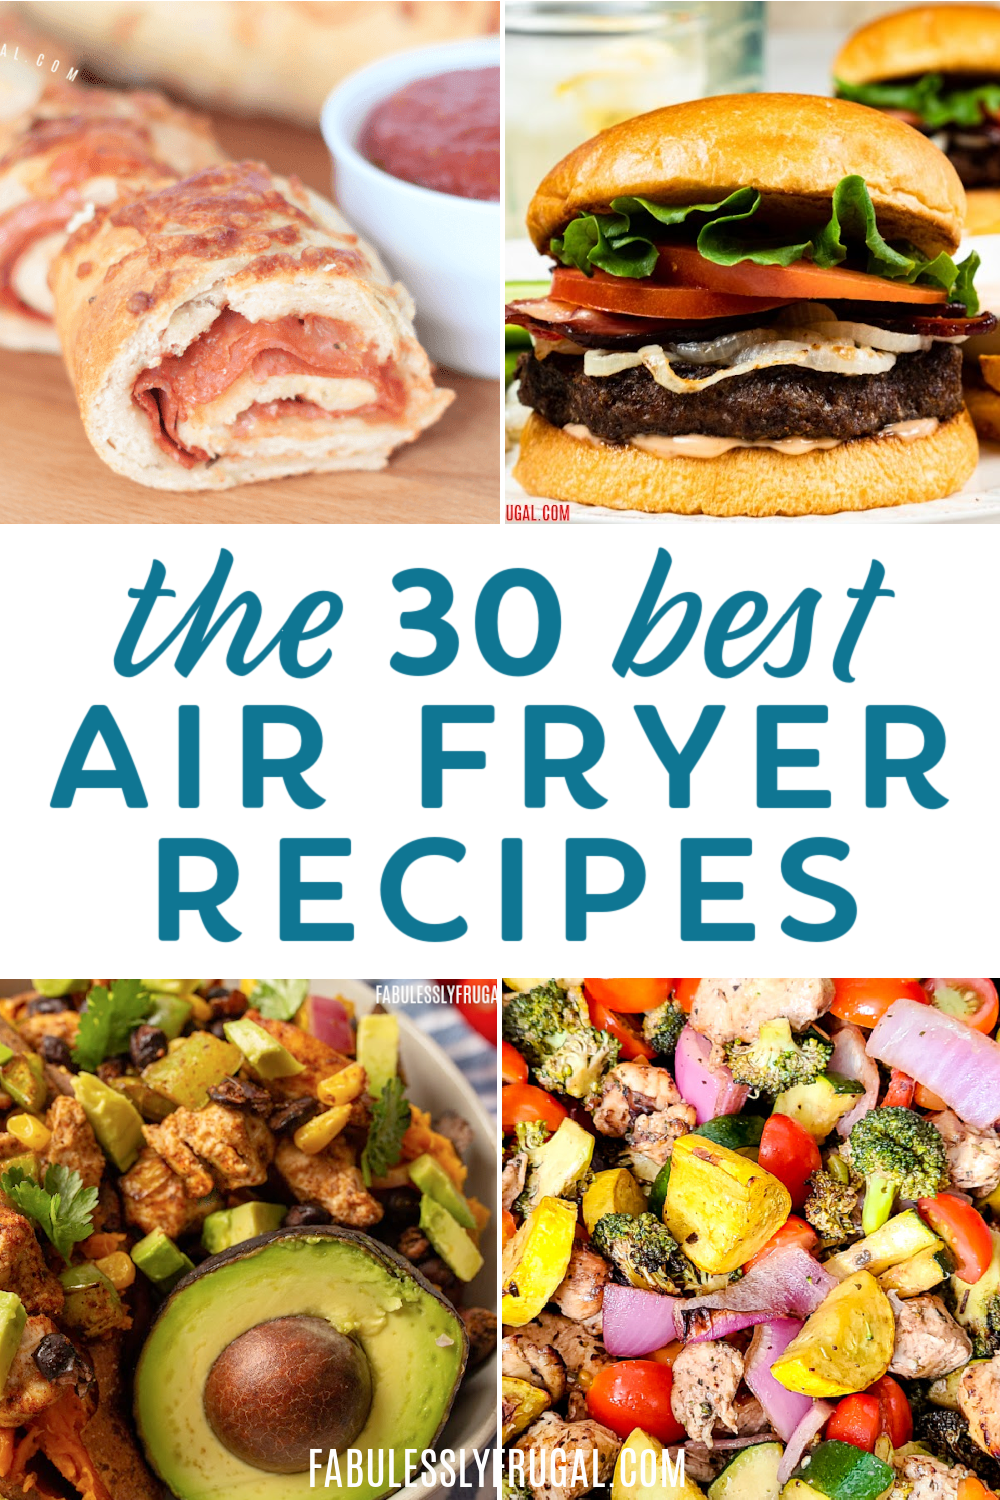 Top 10 Air Fryer Recipes for Kids Recipe - Fabulessly Frugal